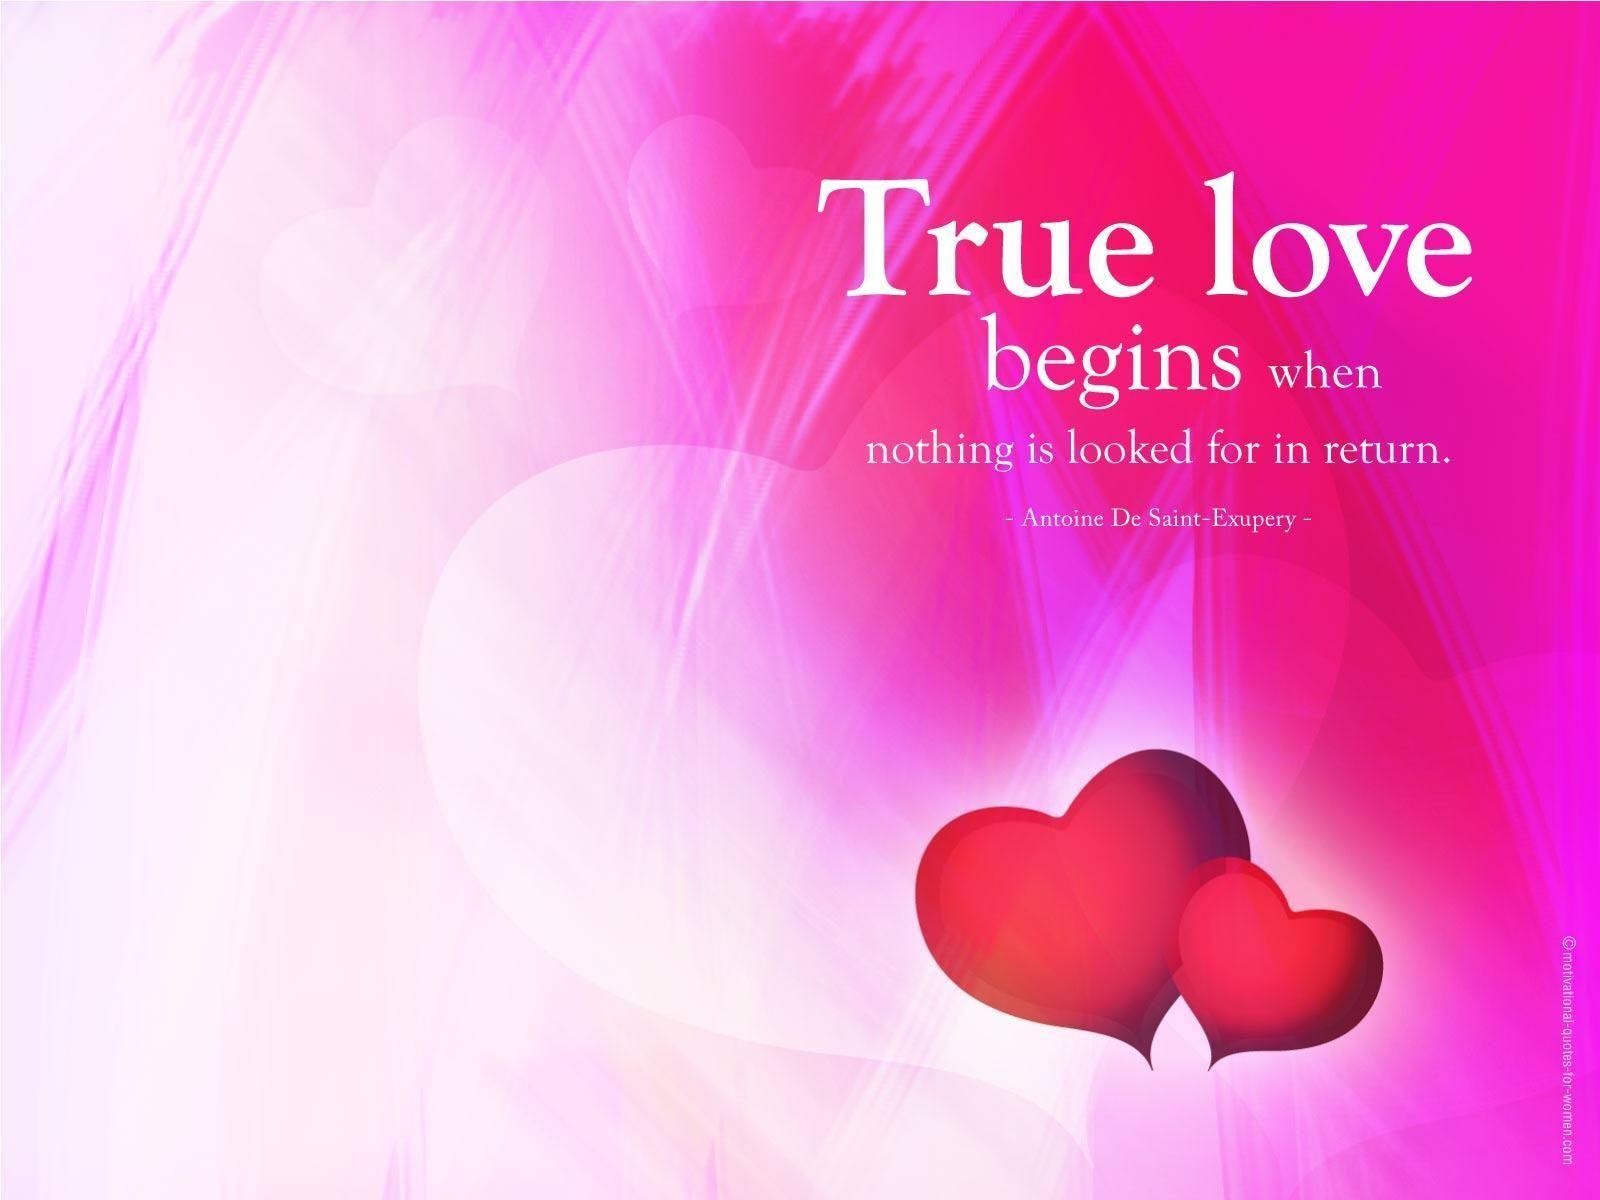 Wallpaper True Love Images Download Be Inspired With Our Collection